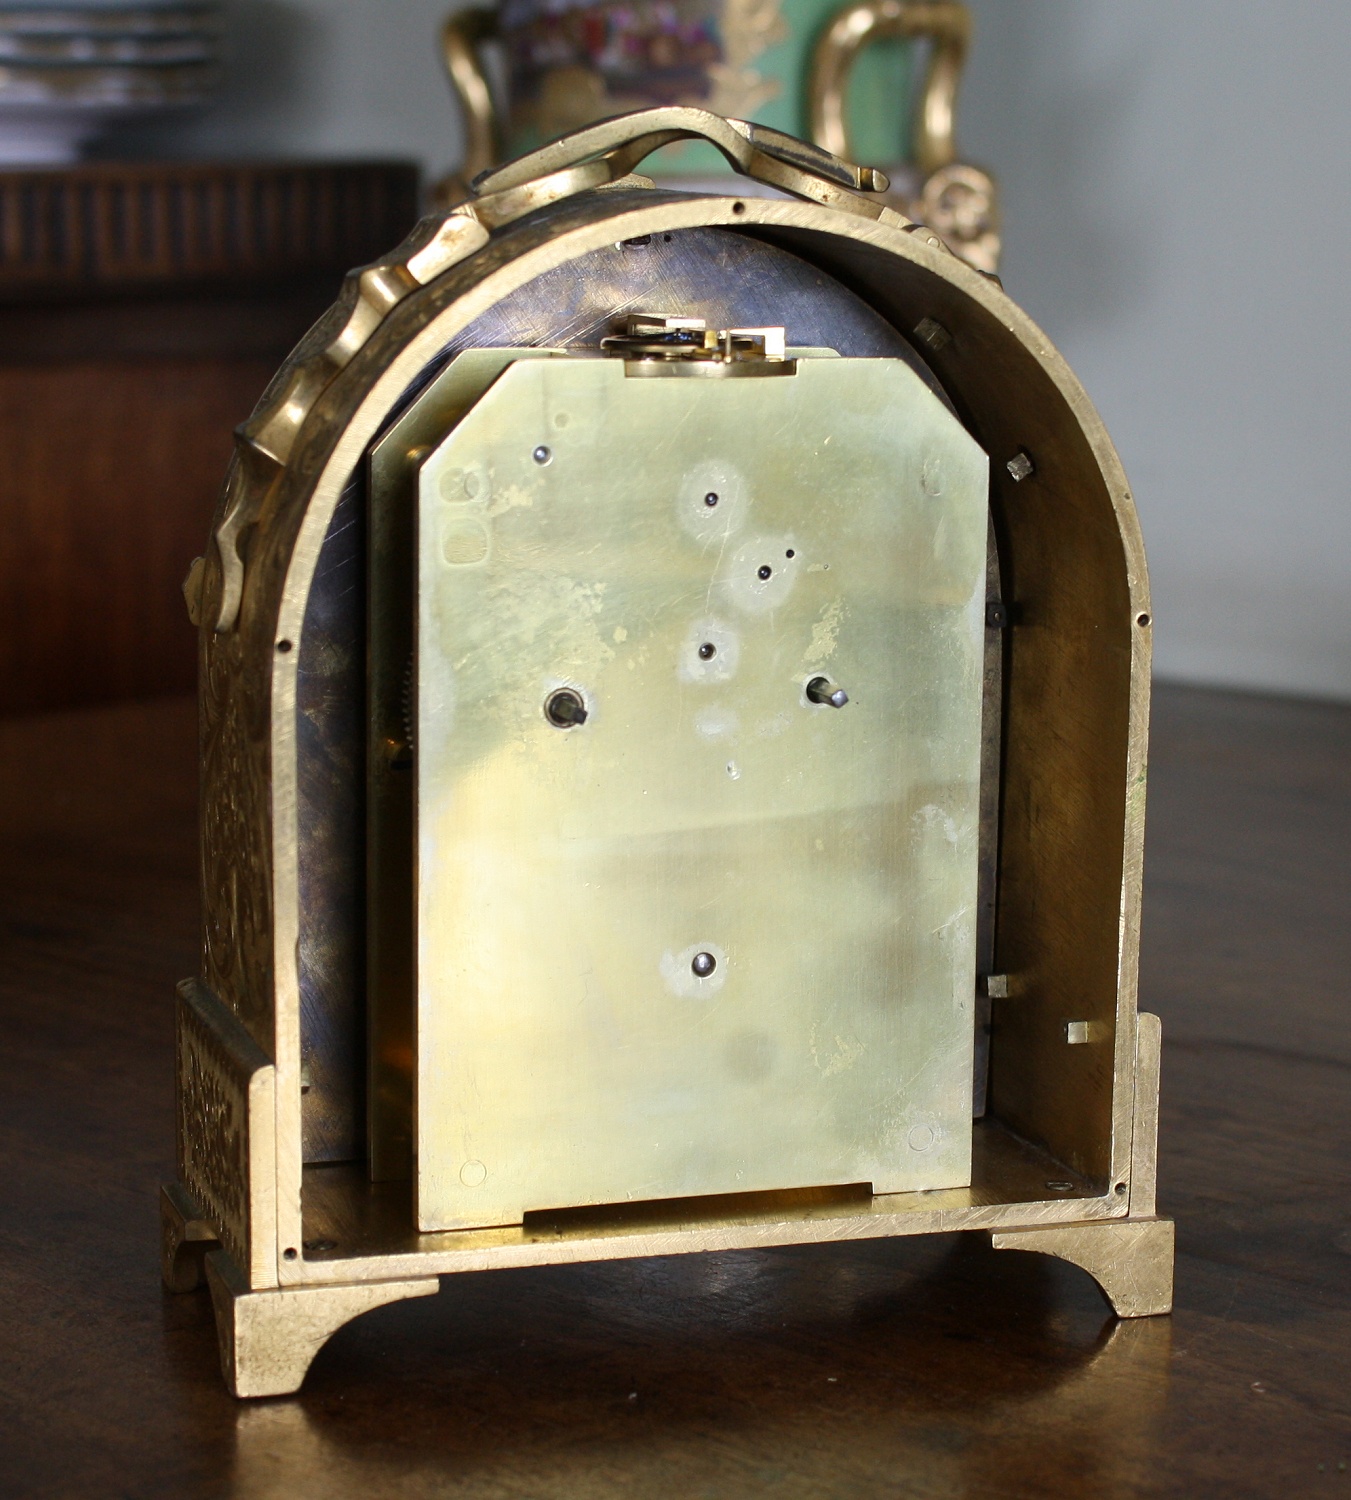 A fine and rare early Victorian engraved gilt brass hump-back carriage clock by James Murray of - Image 2 of 7